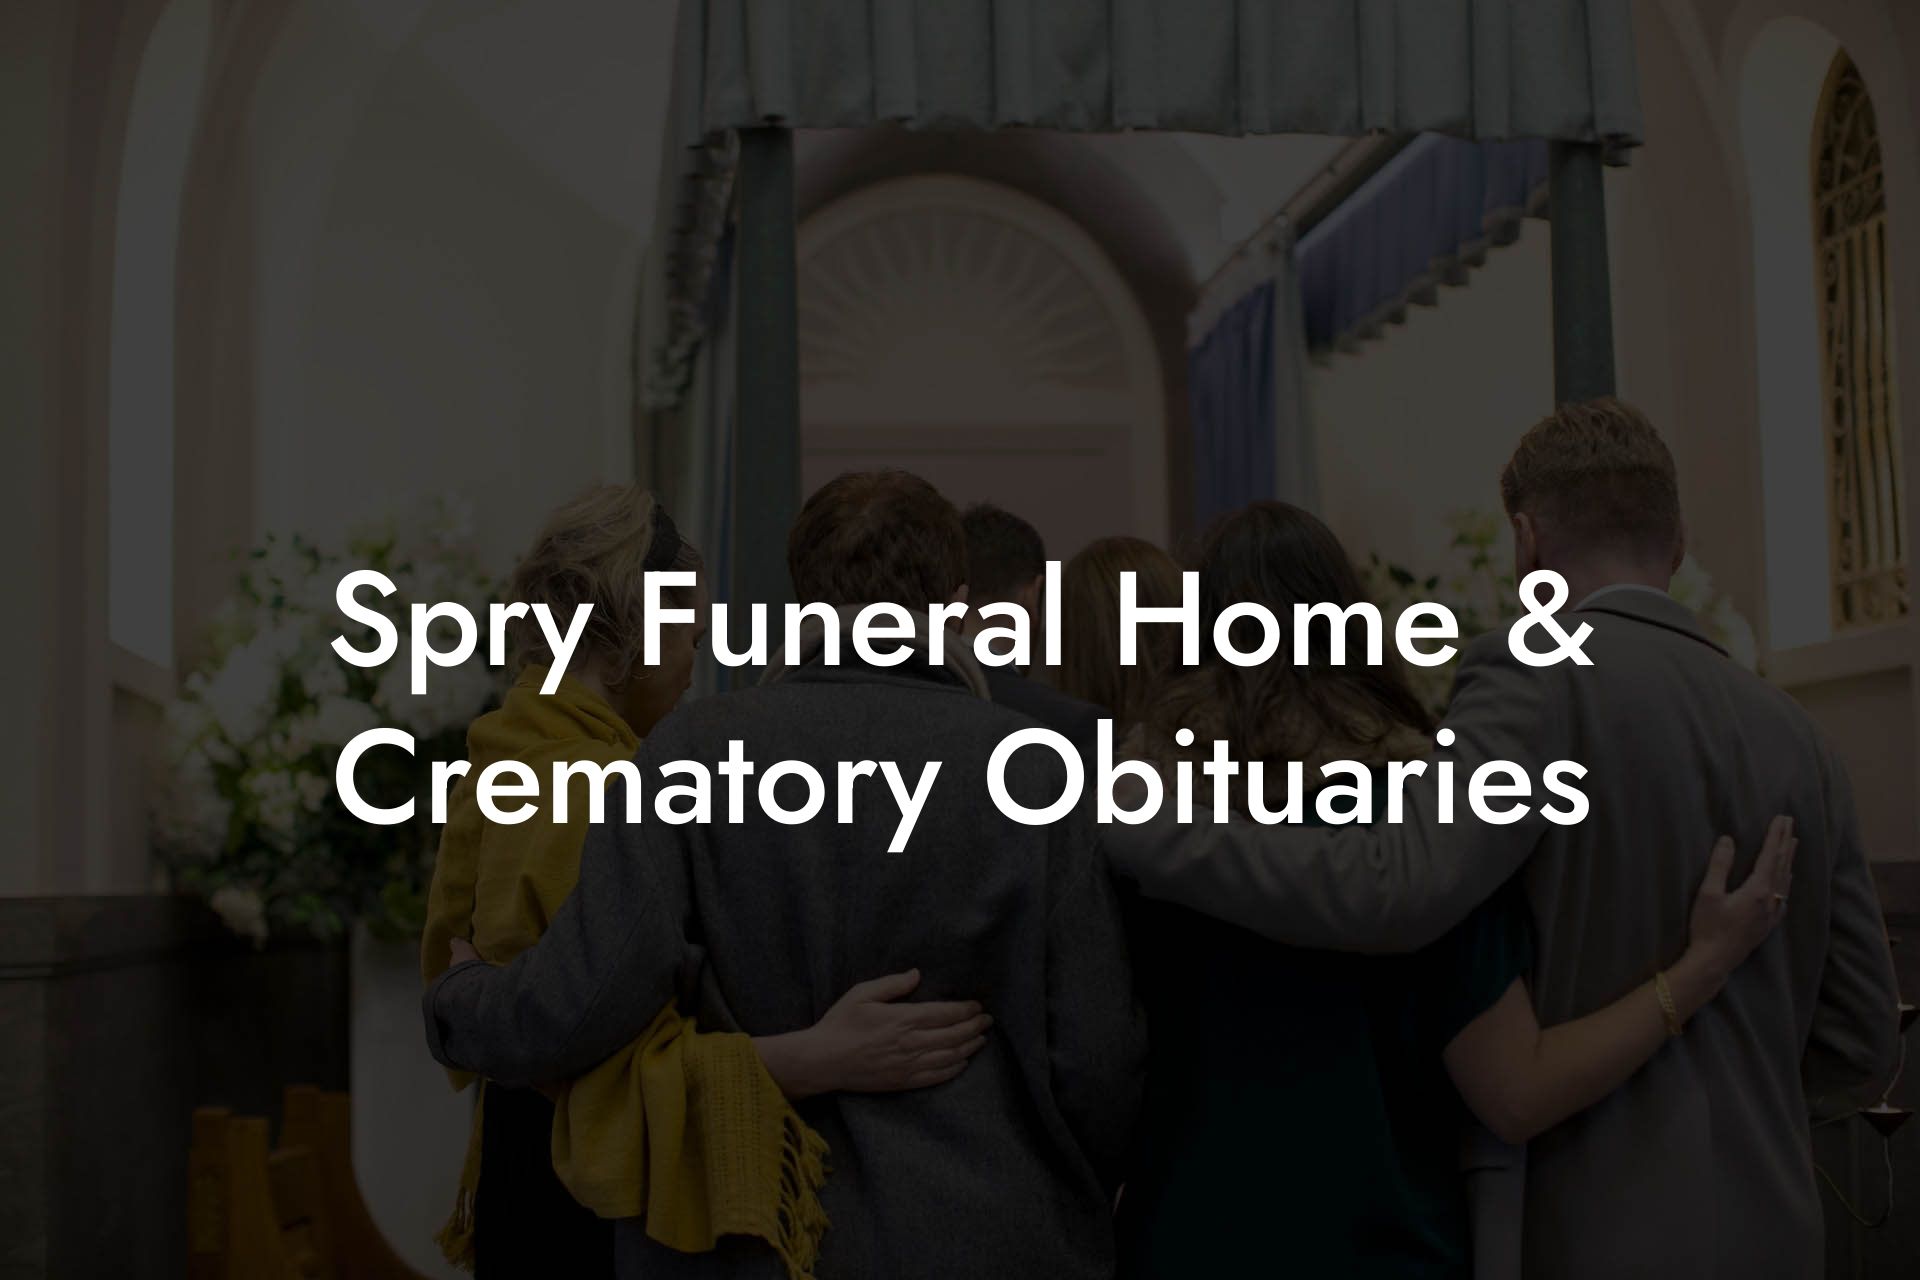 Spry Funeral Home & Crematory Obituaries